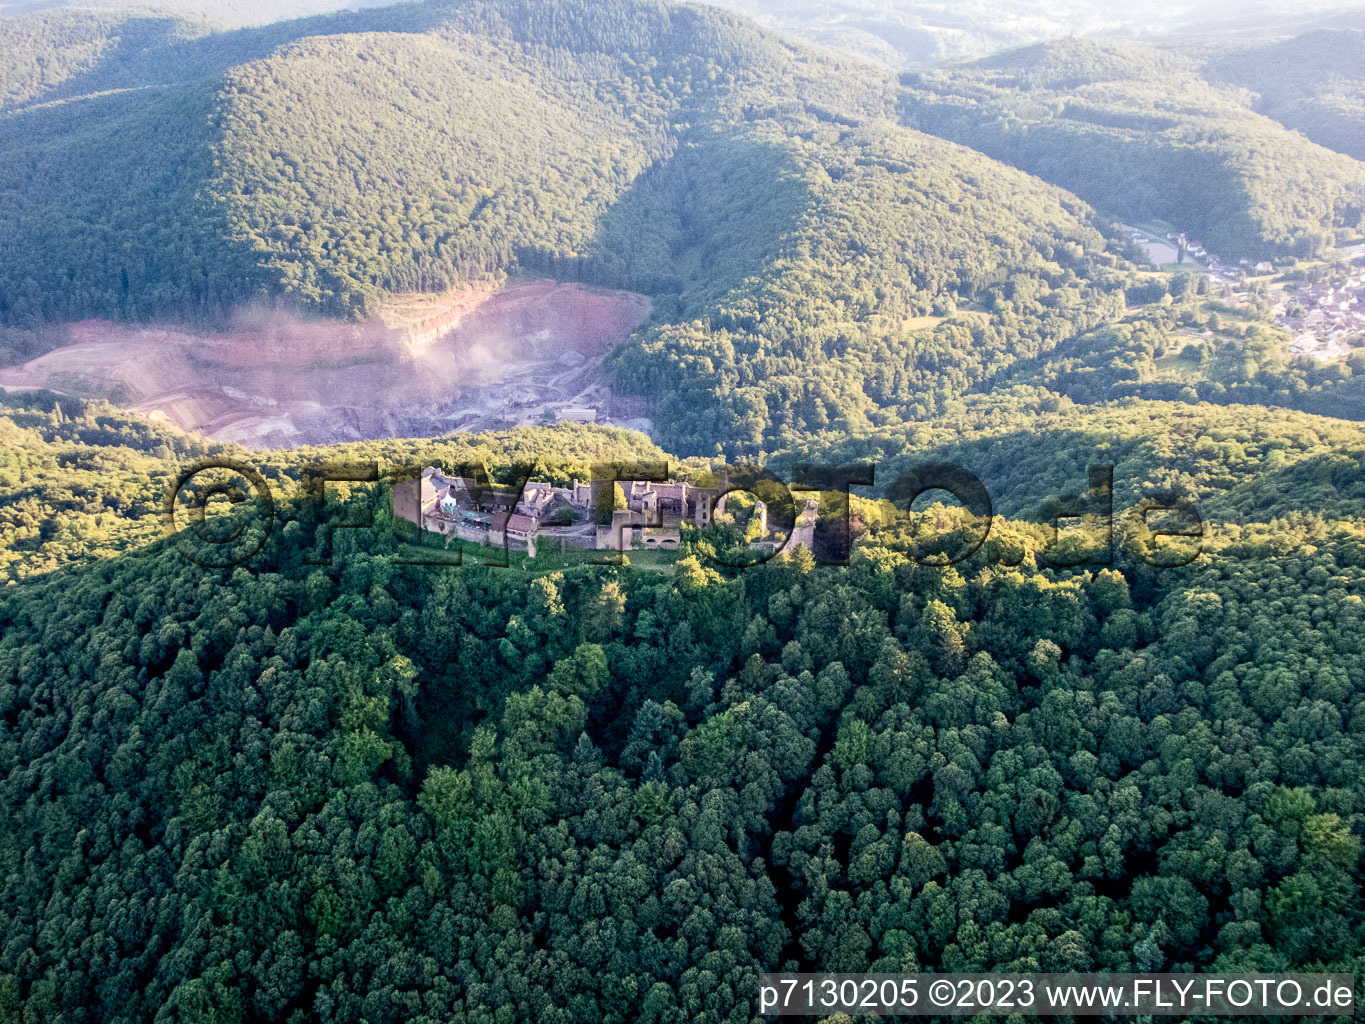 Quarry in Waldhambach in the state Rhineland-Palatinate, Germany seen from above